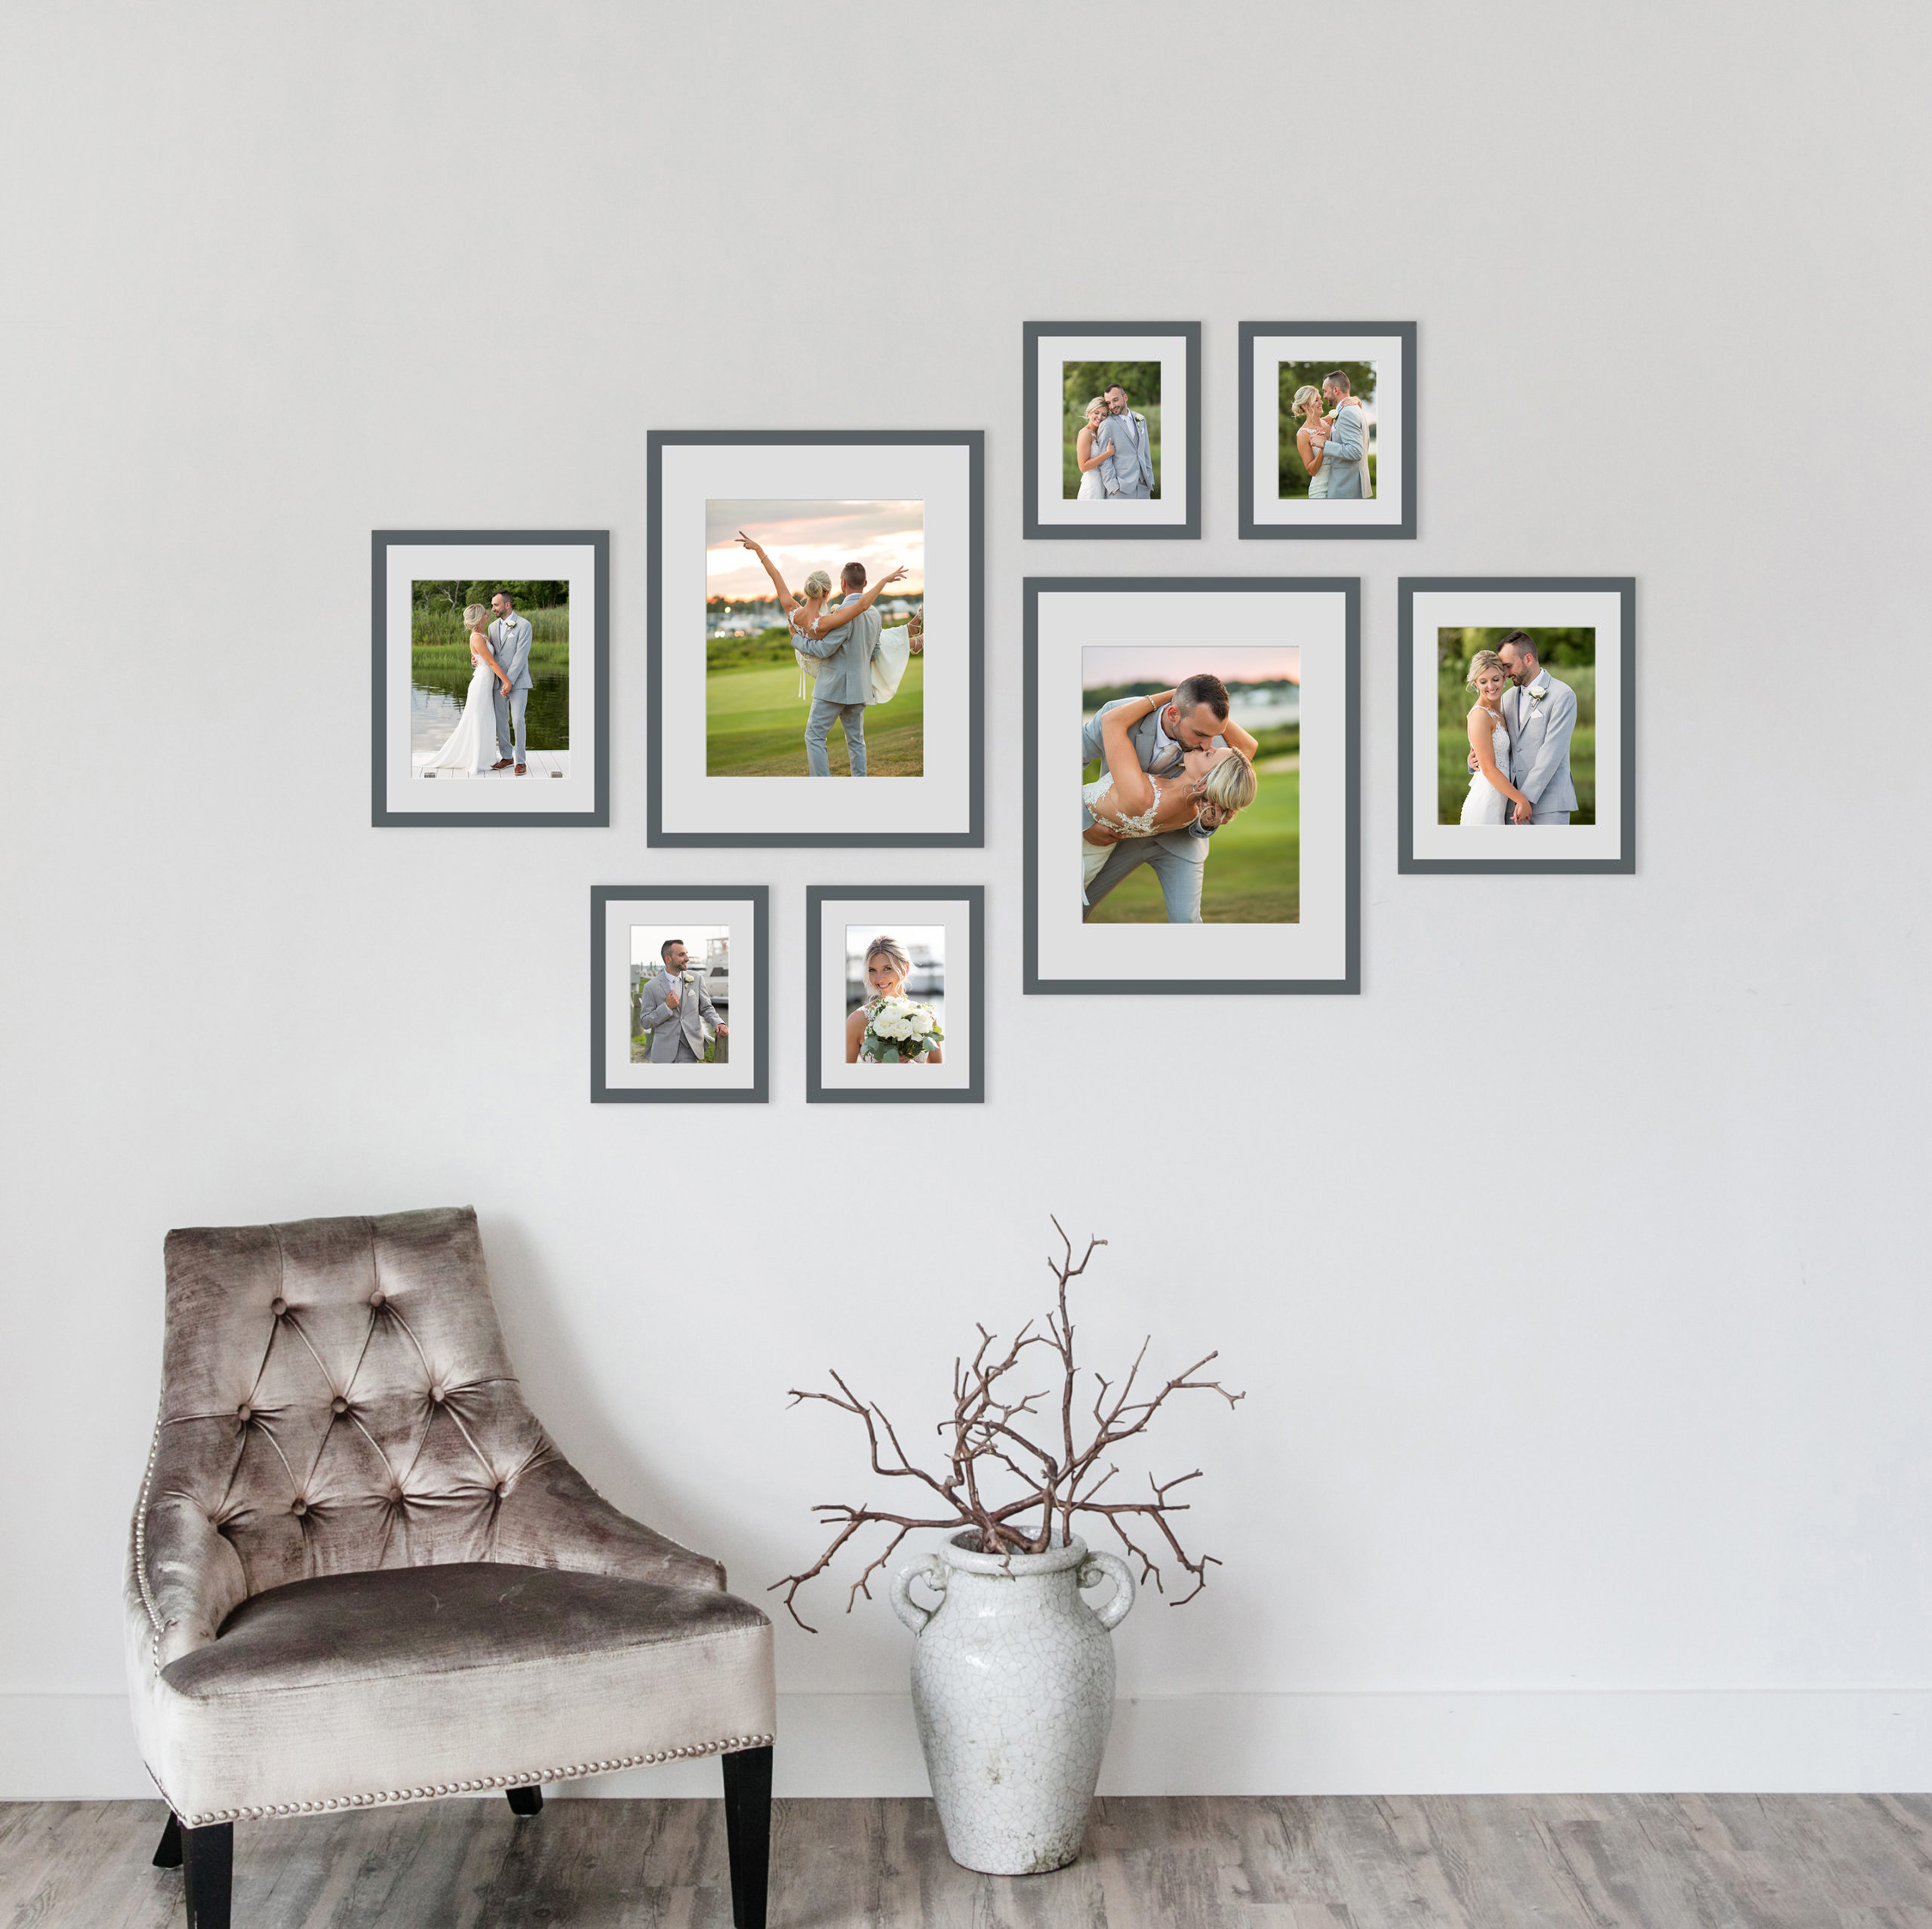 Wall Art is a way for you to truly enjoy your wedding images on an every day basis. Displaying your love on your walls can make a house feel more like a home. Our Fine Art Wall Collections and Statement Framed Canvases are created with design in mind, they are not just photographs but statement pieces in your home. 